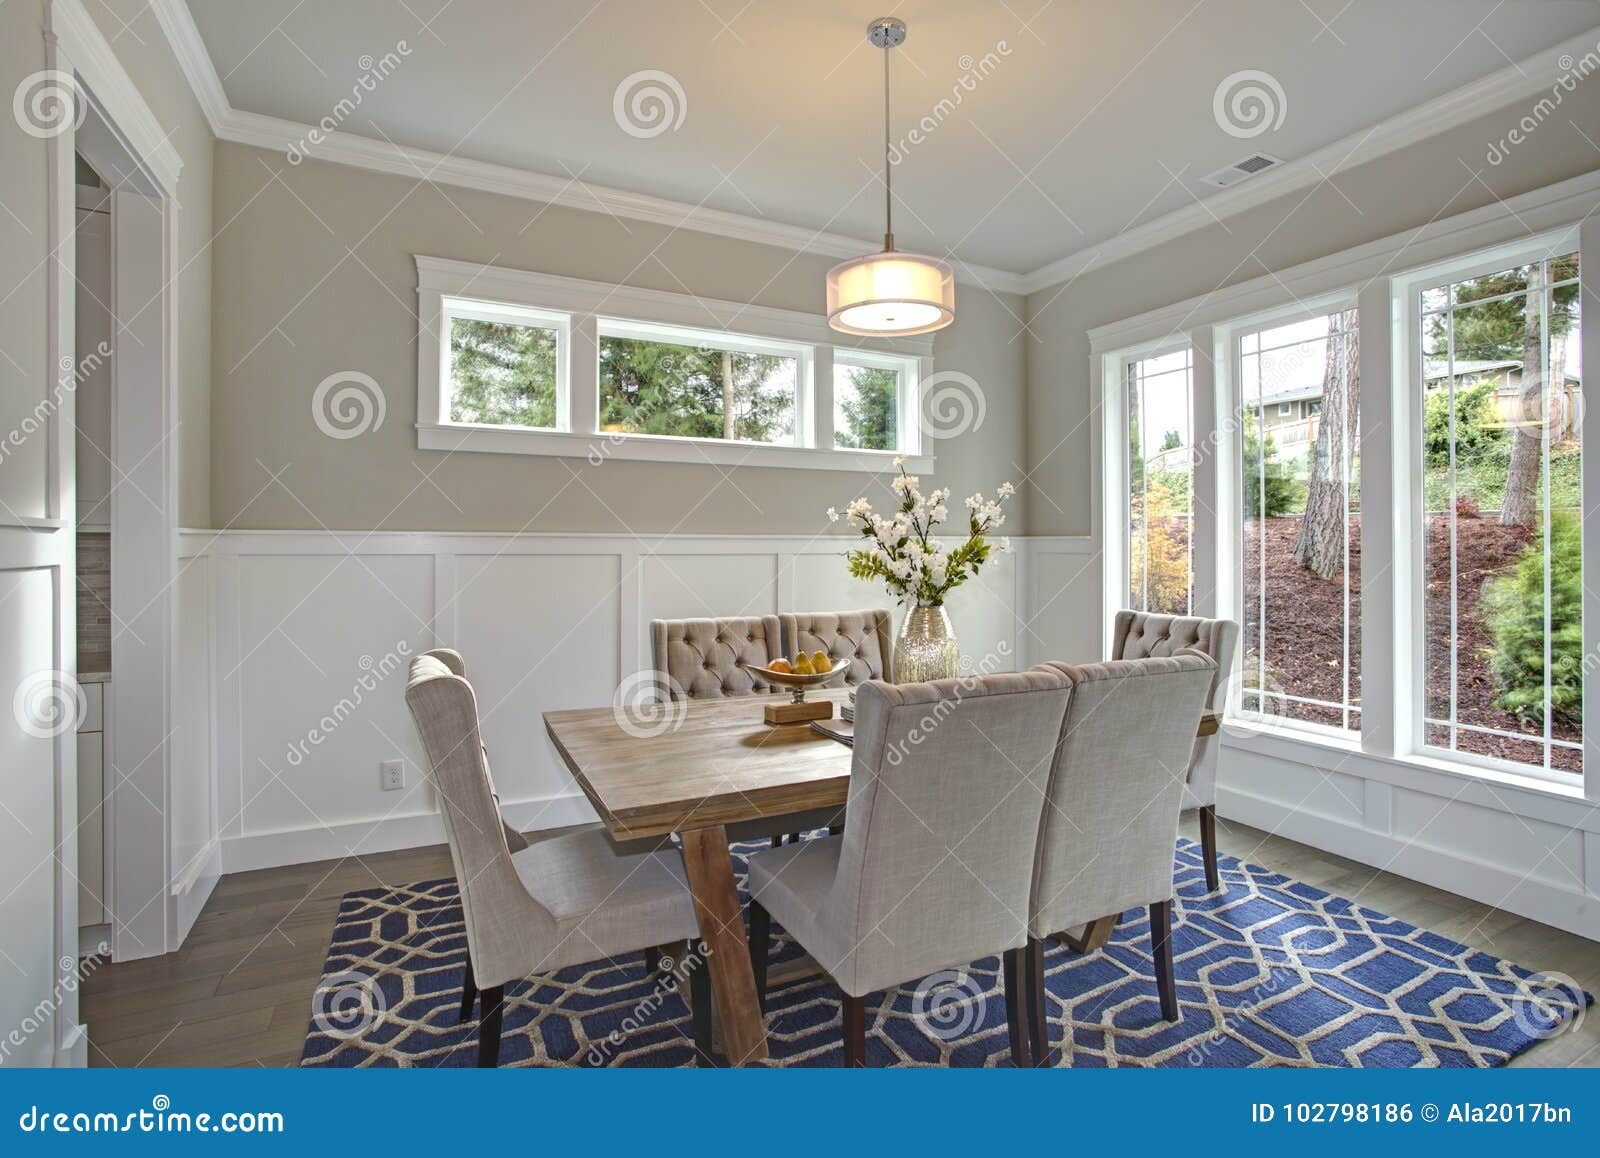 Elegant Transitional Dining Room With Board And Batten Walls